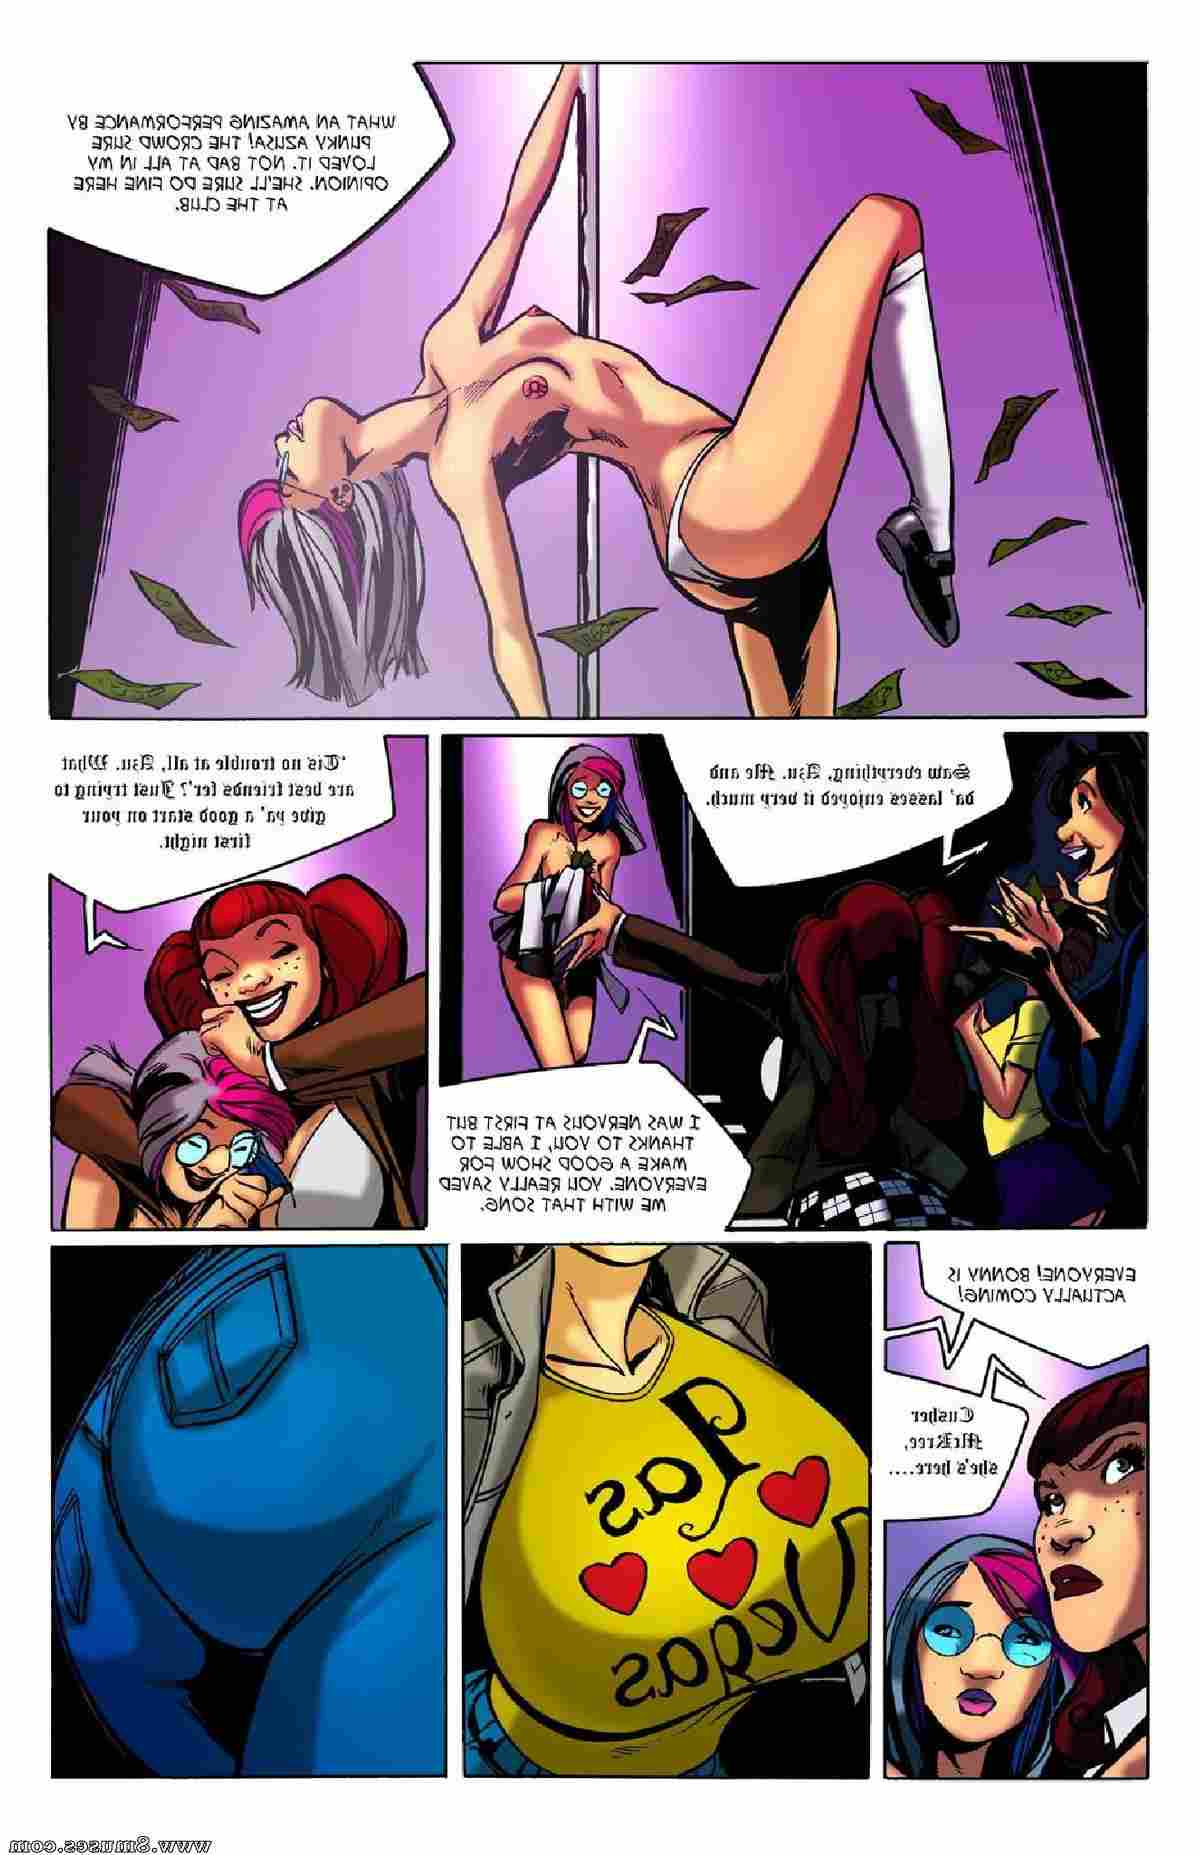 BE-Story-Club-Comics/Changing-and-Growing-in-Las-Vegas Changing_and_Growing_in_Las_Vegas__8muses_-_Sex_and_Porn_Comics_11.jpg